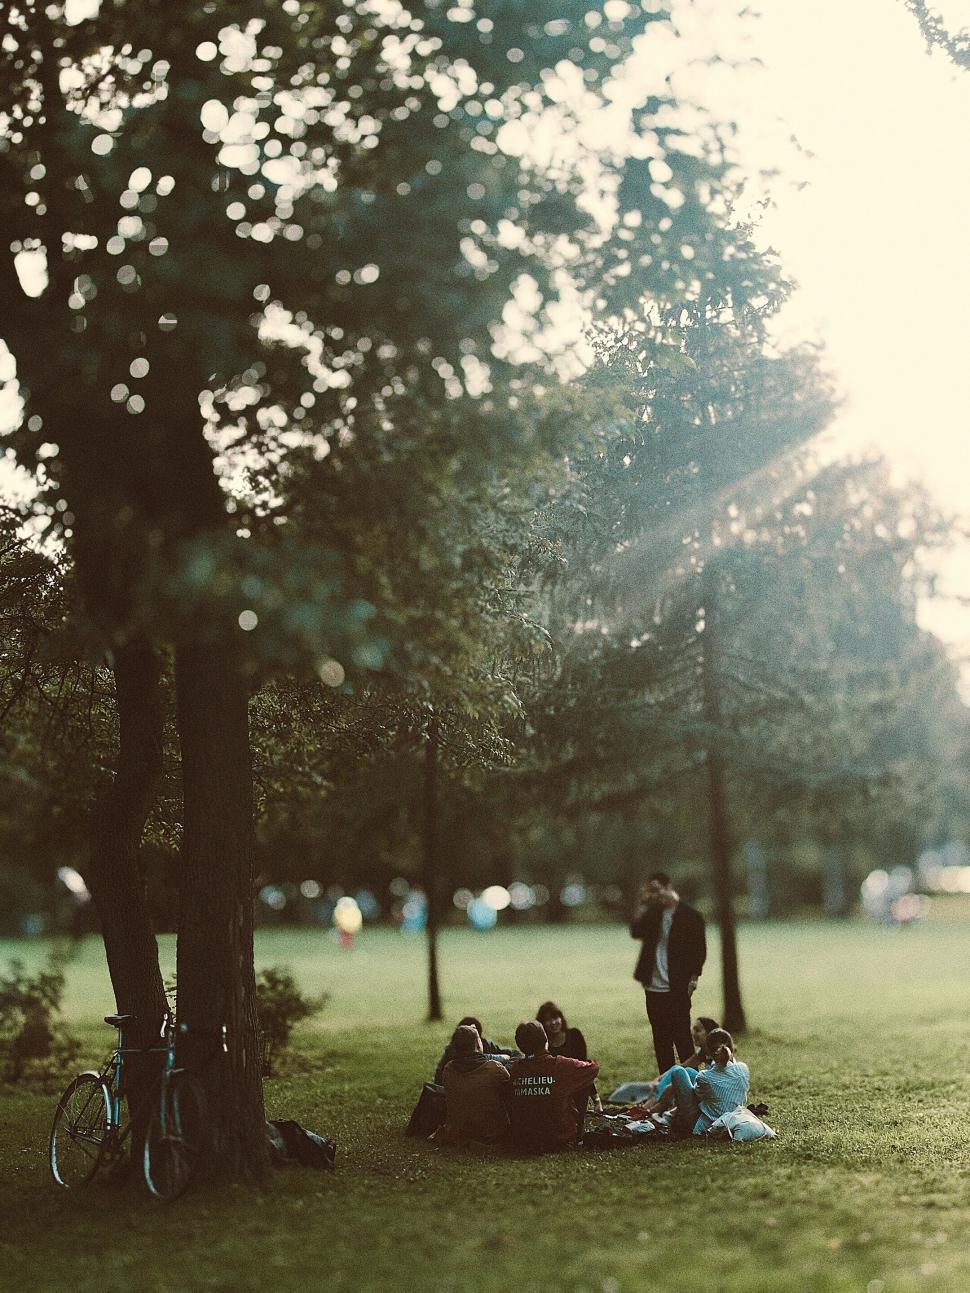 Free Image of Soft focus of people in a park at dusk 